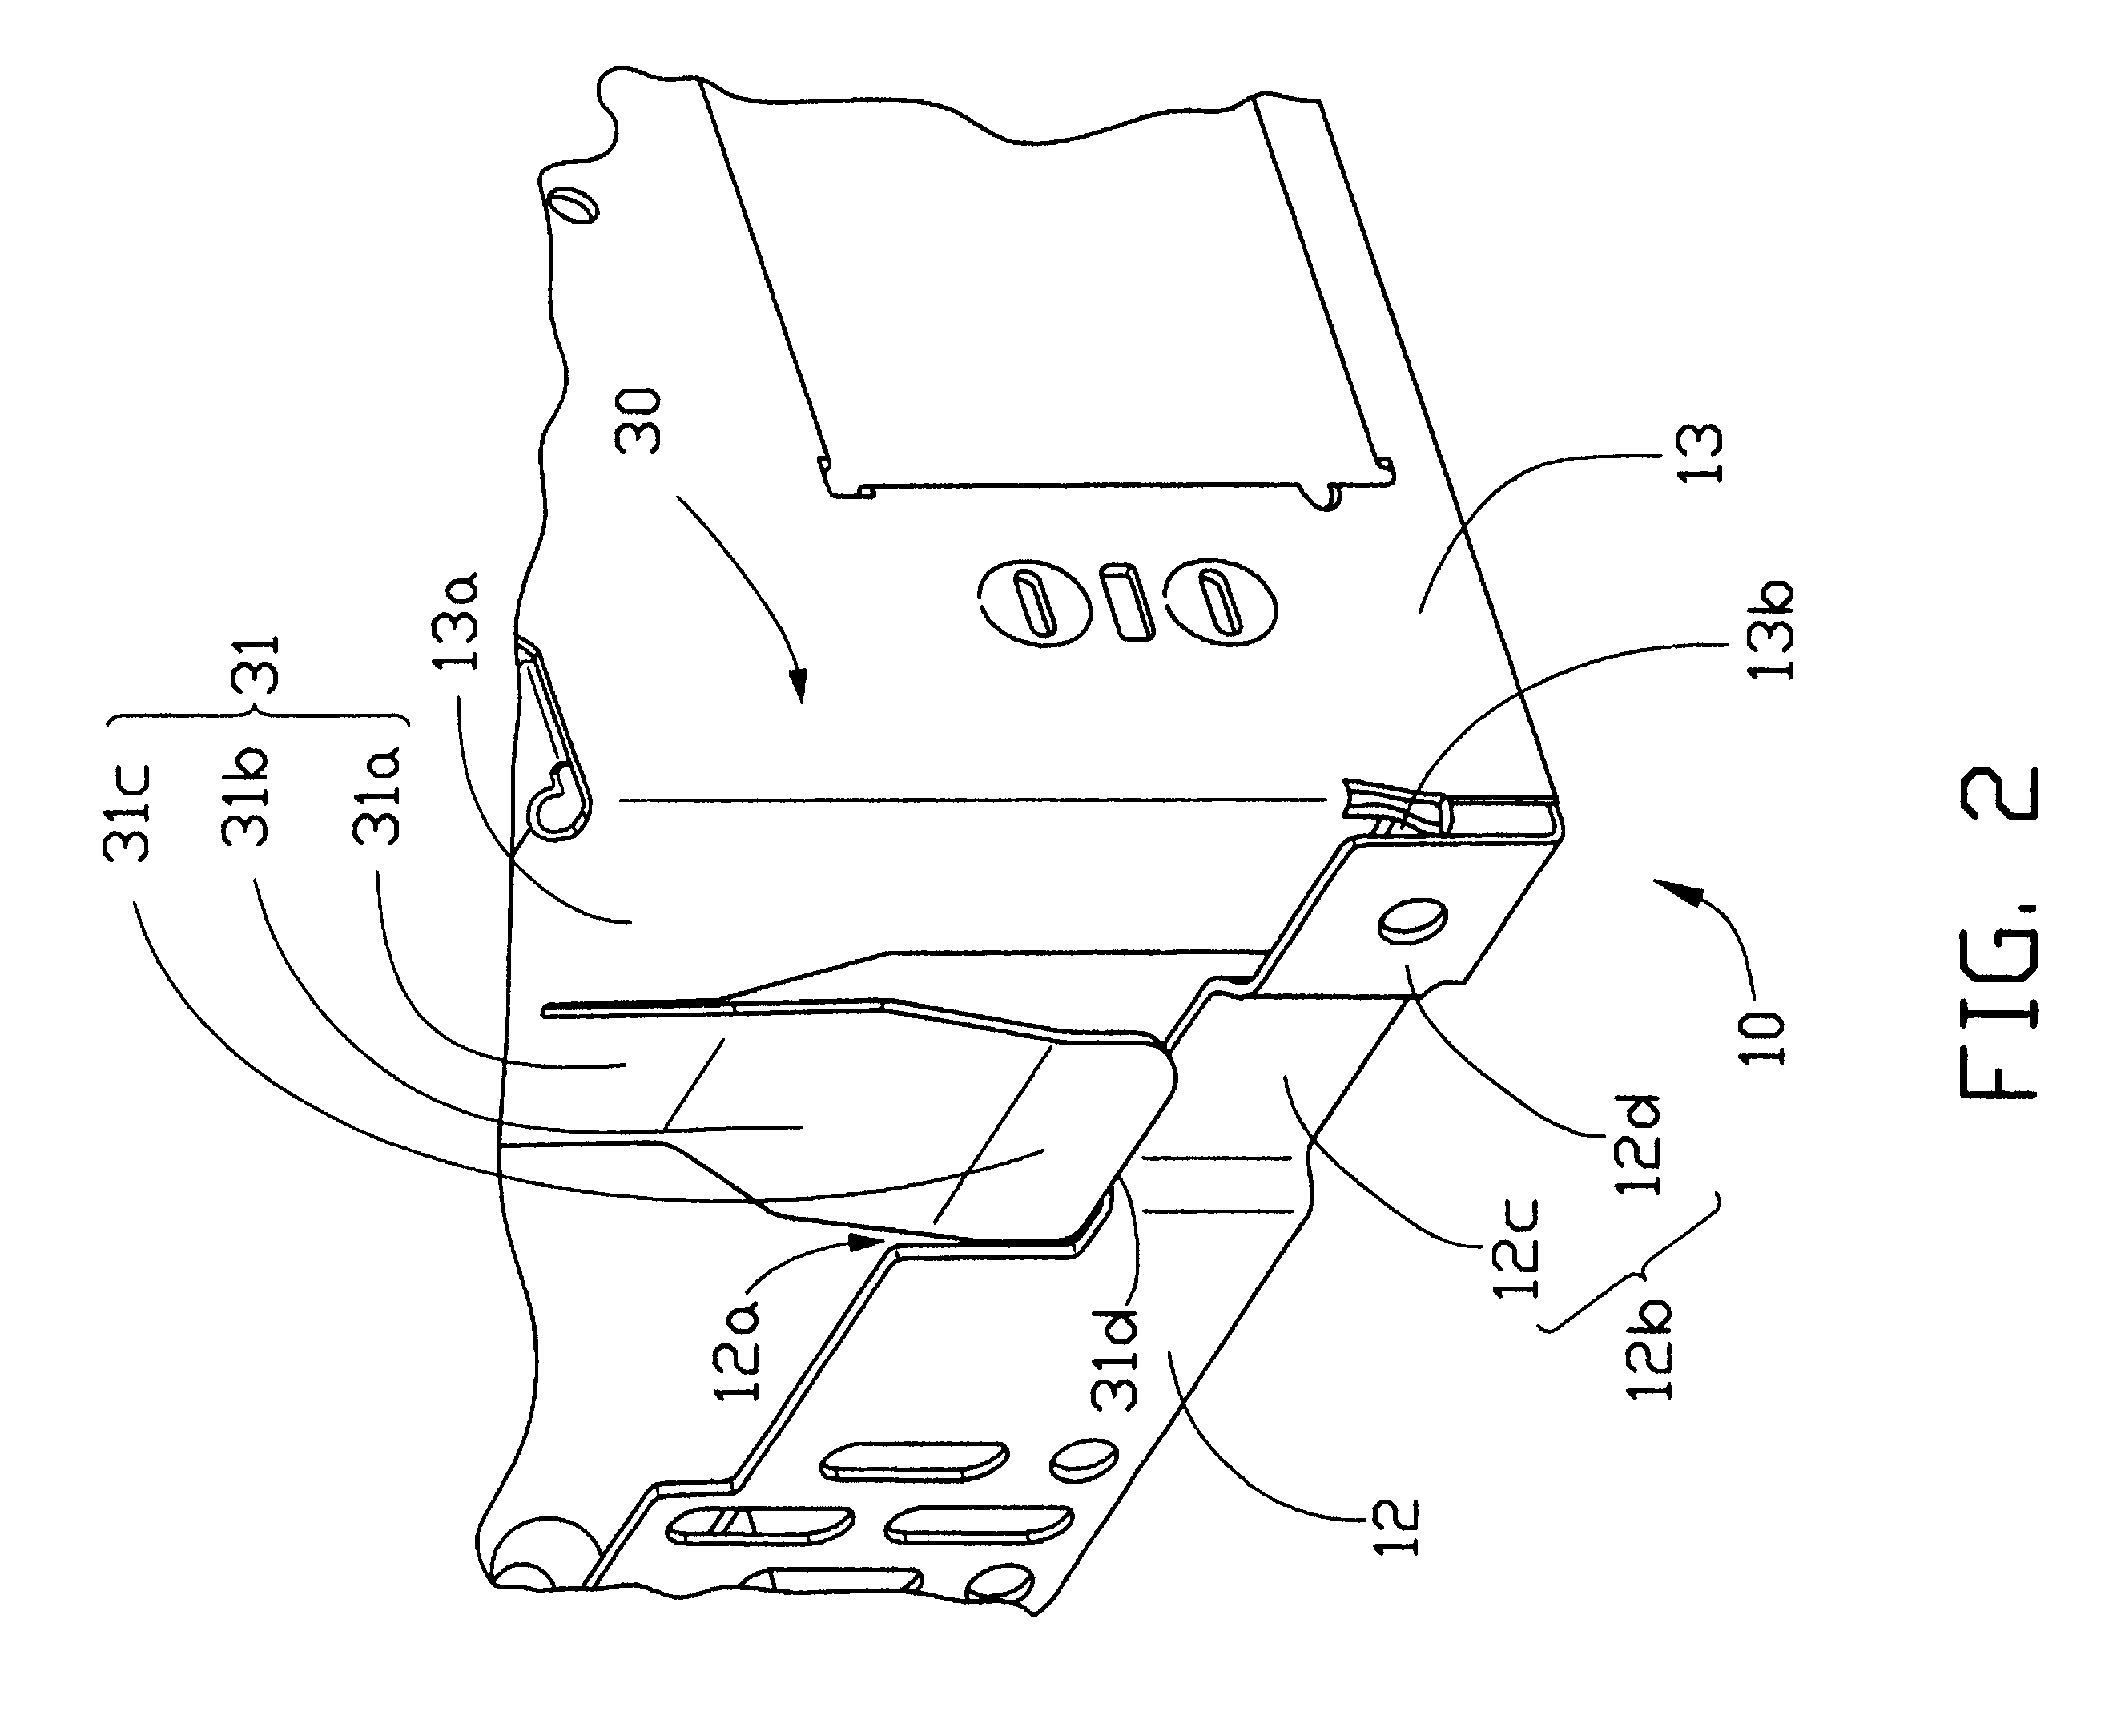 Computer enclosure with releasable interlocking mechanism between cover and chassis